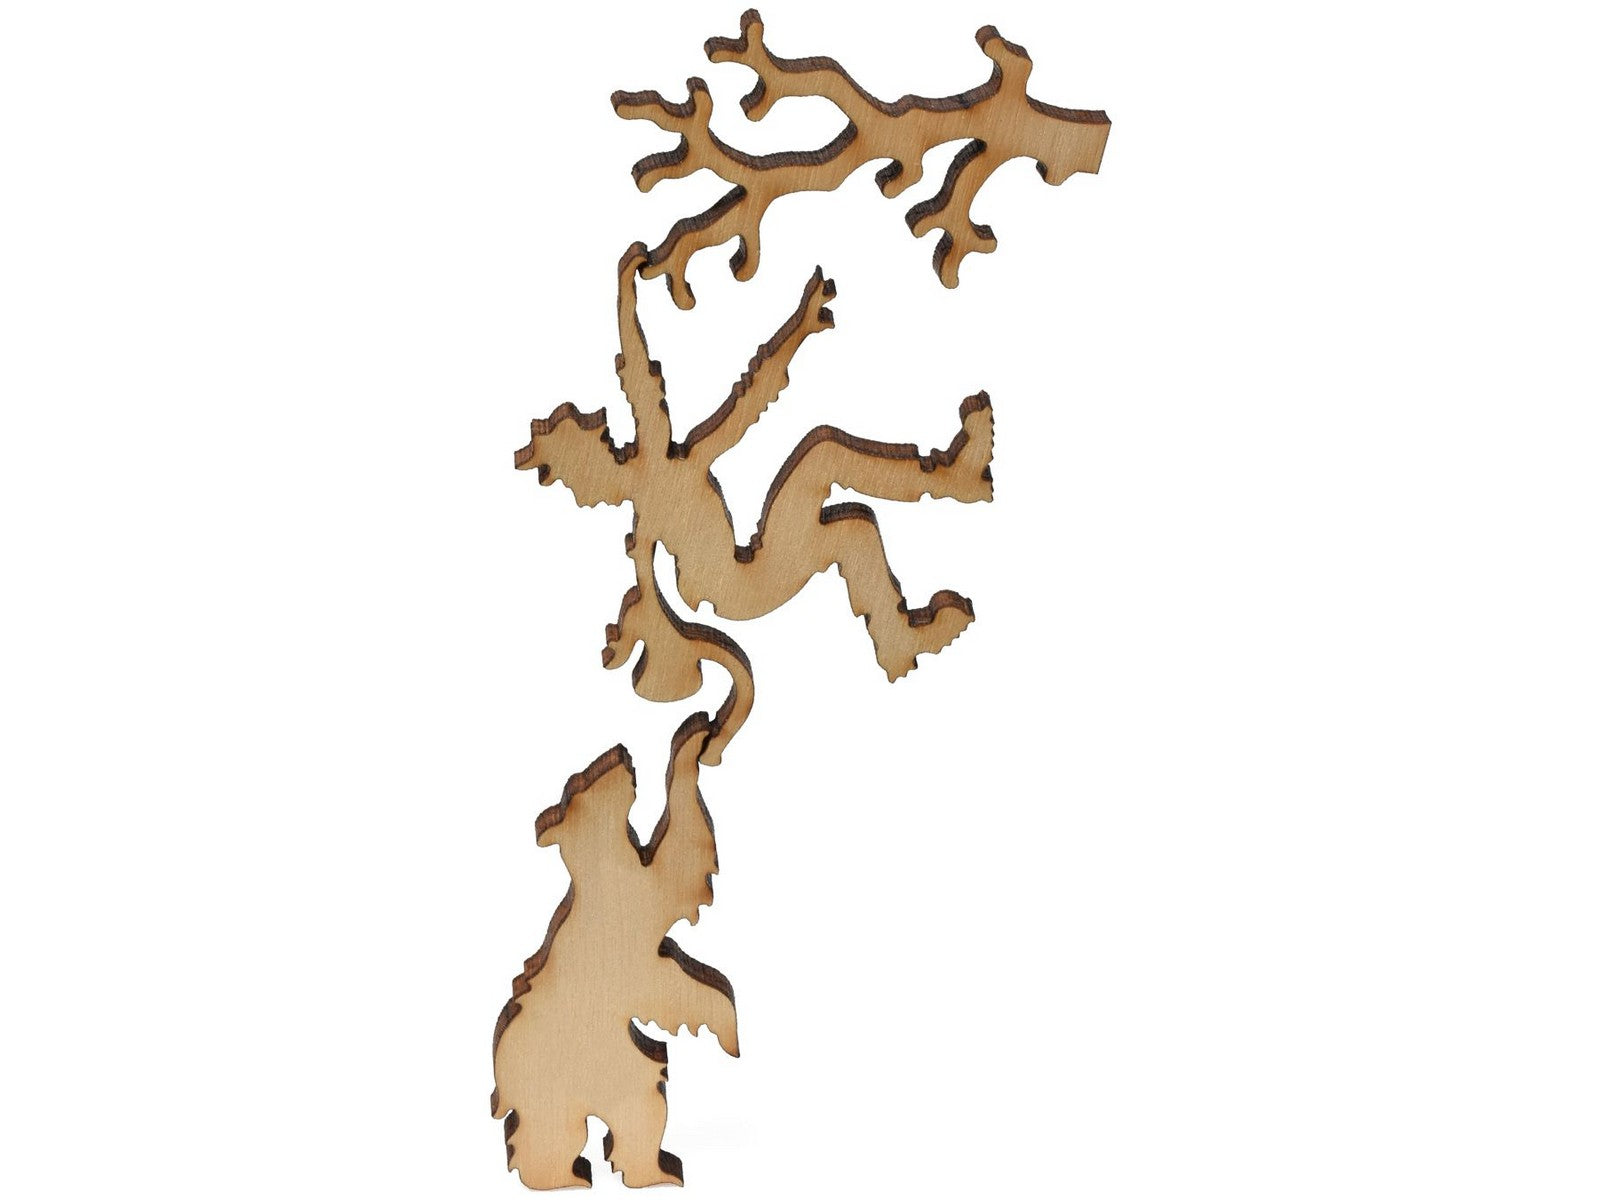 World Wooden Map Puzzle - The Puzzle Man